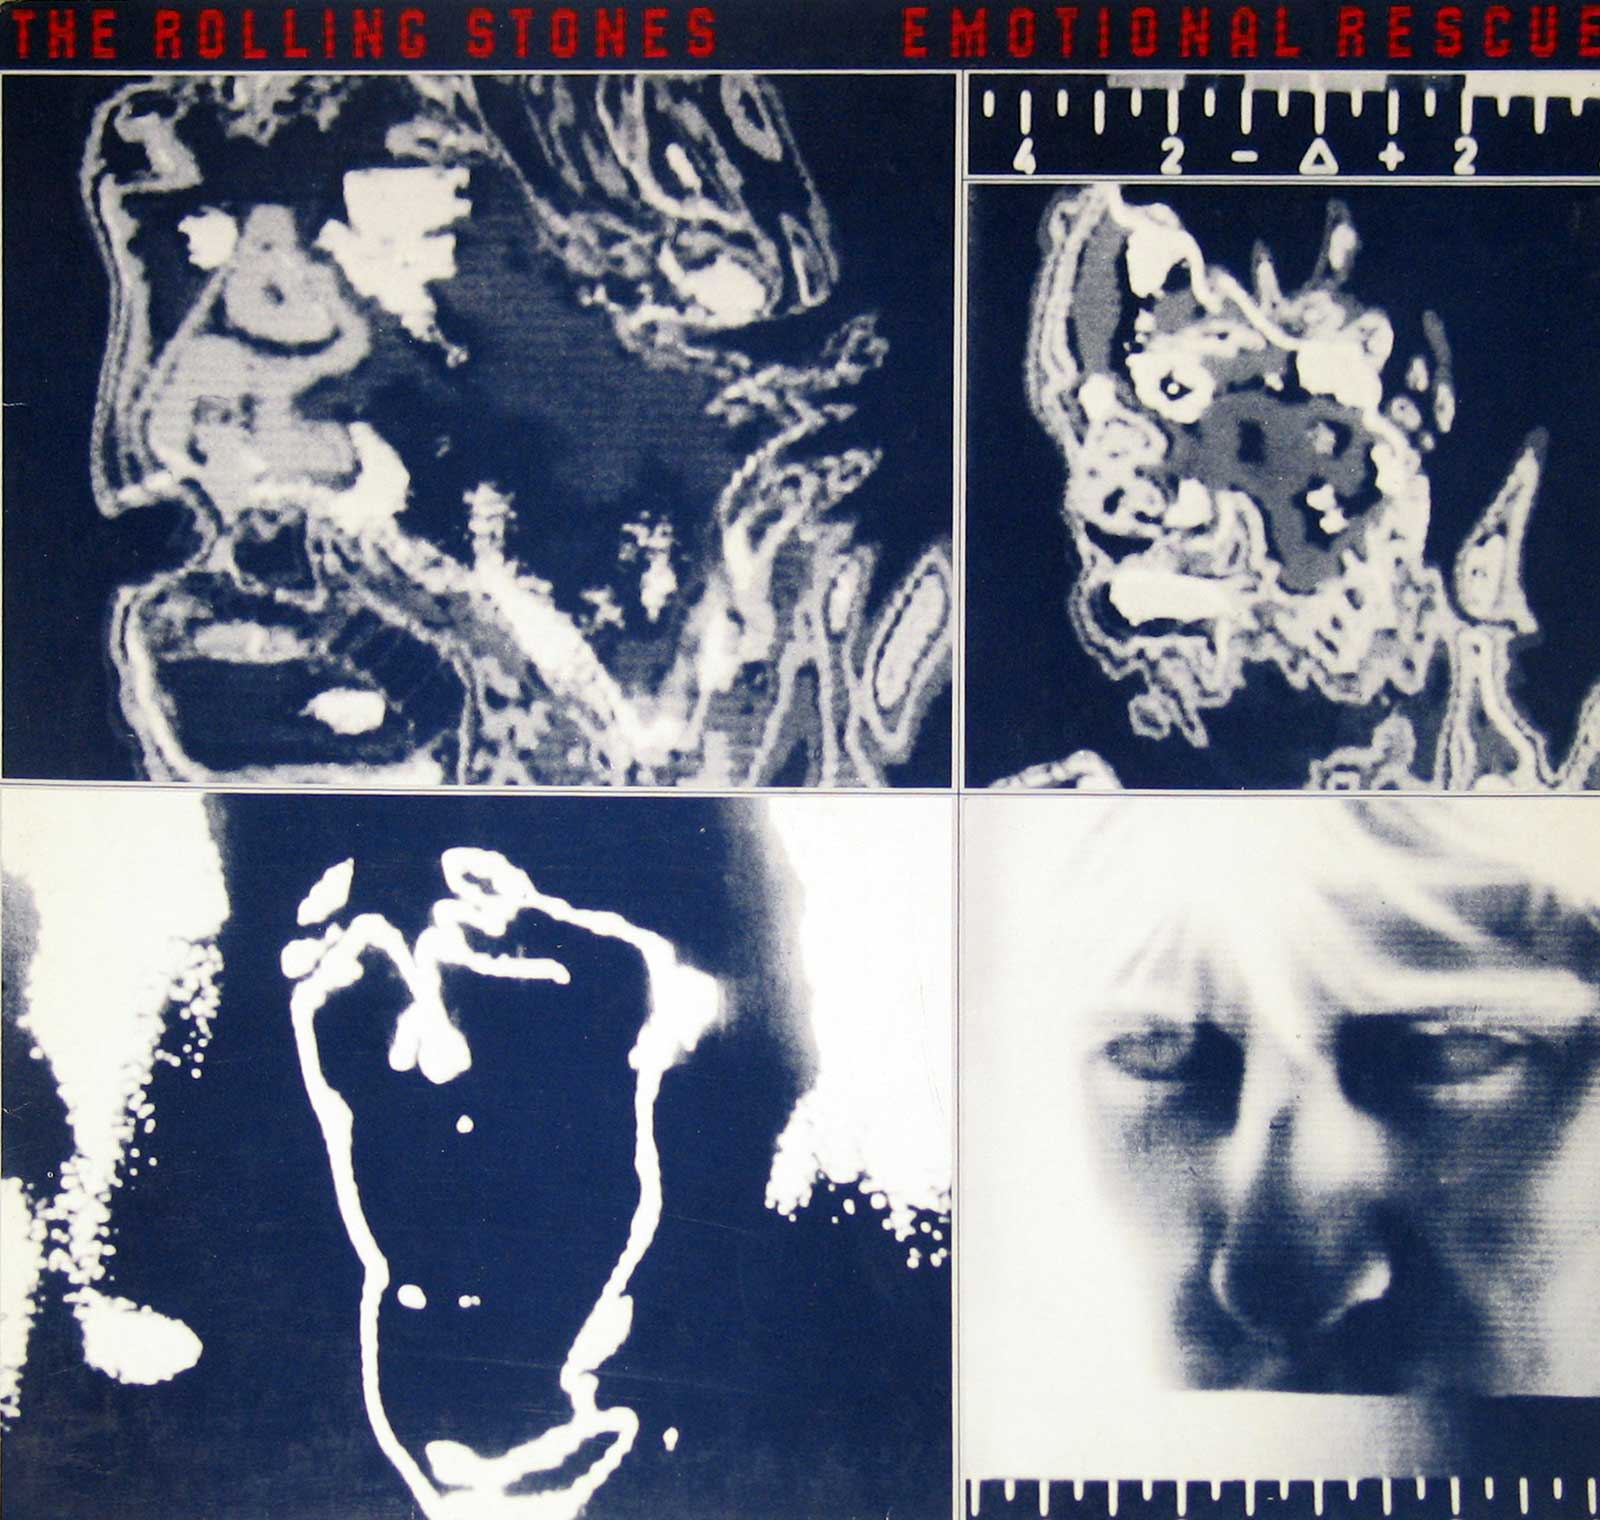 large album front cover photo of: Rolling Stones - Emotional Rescue 